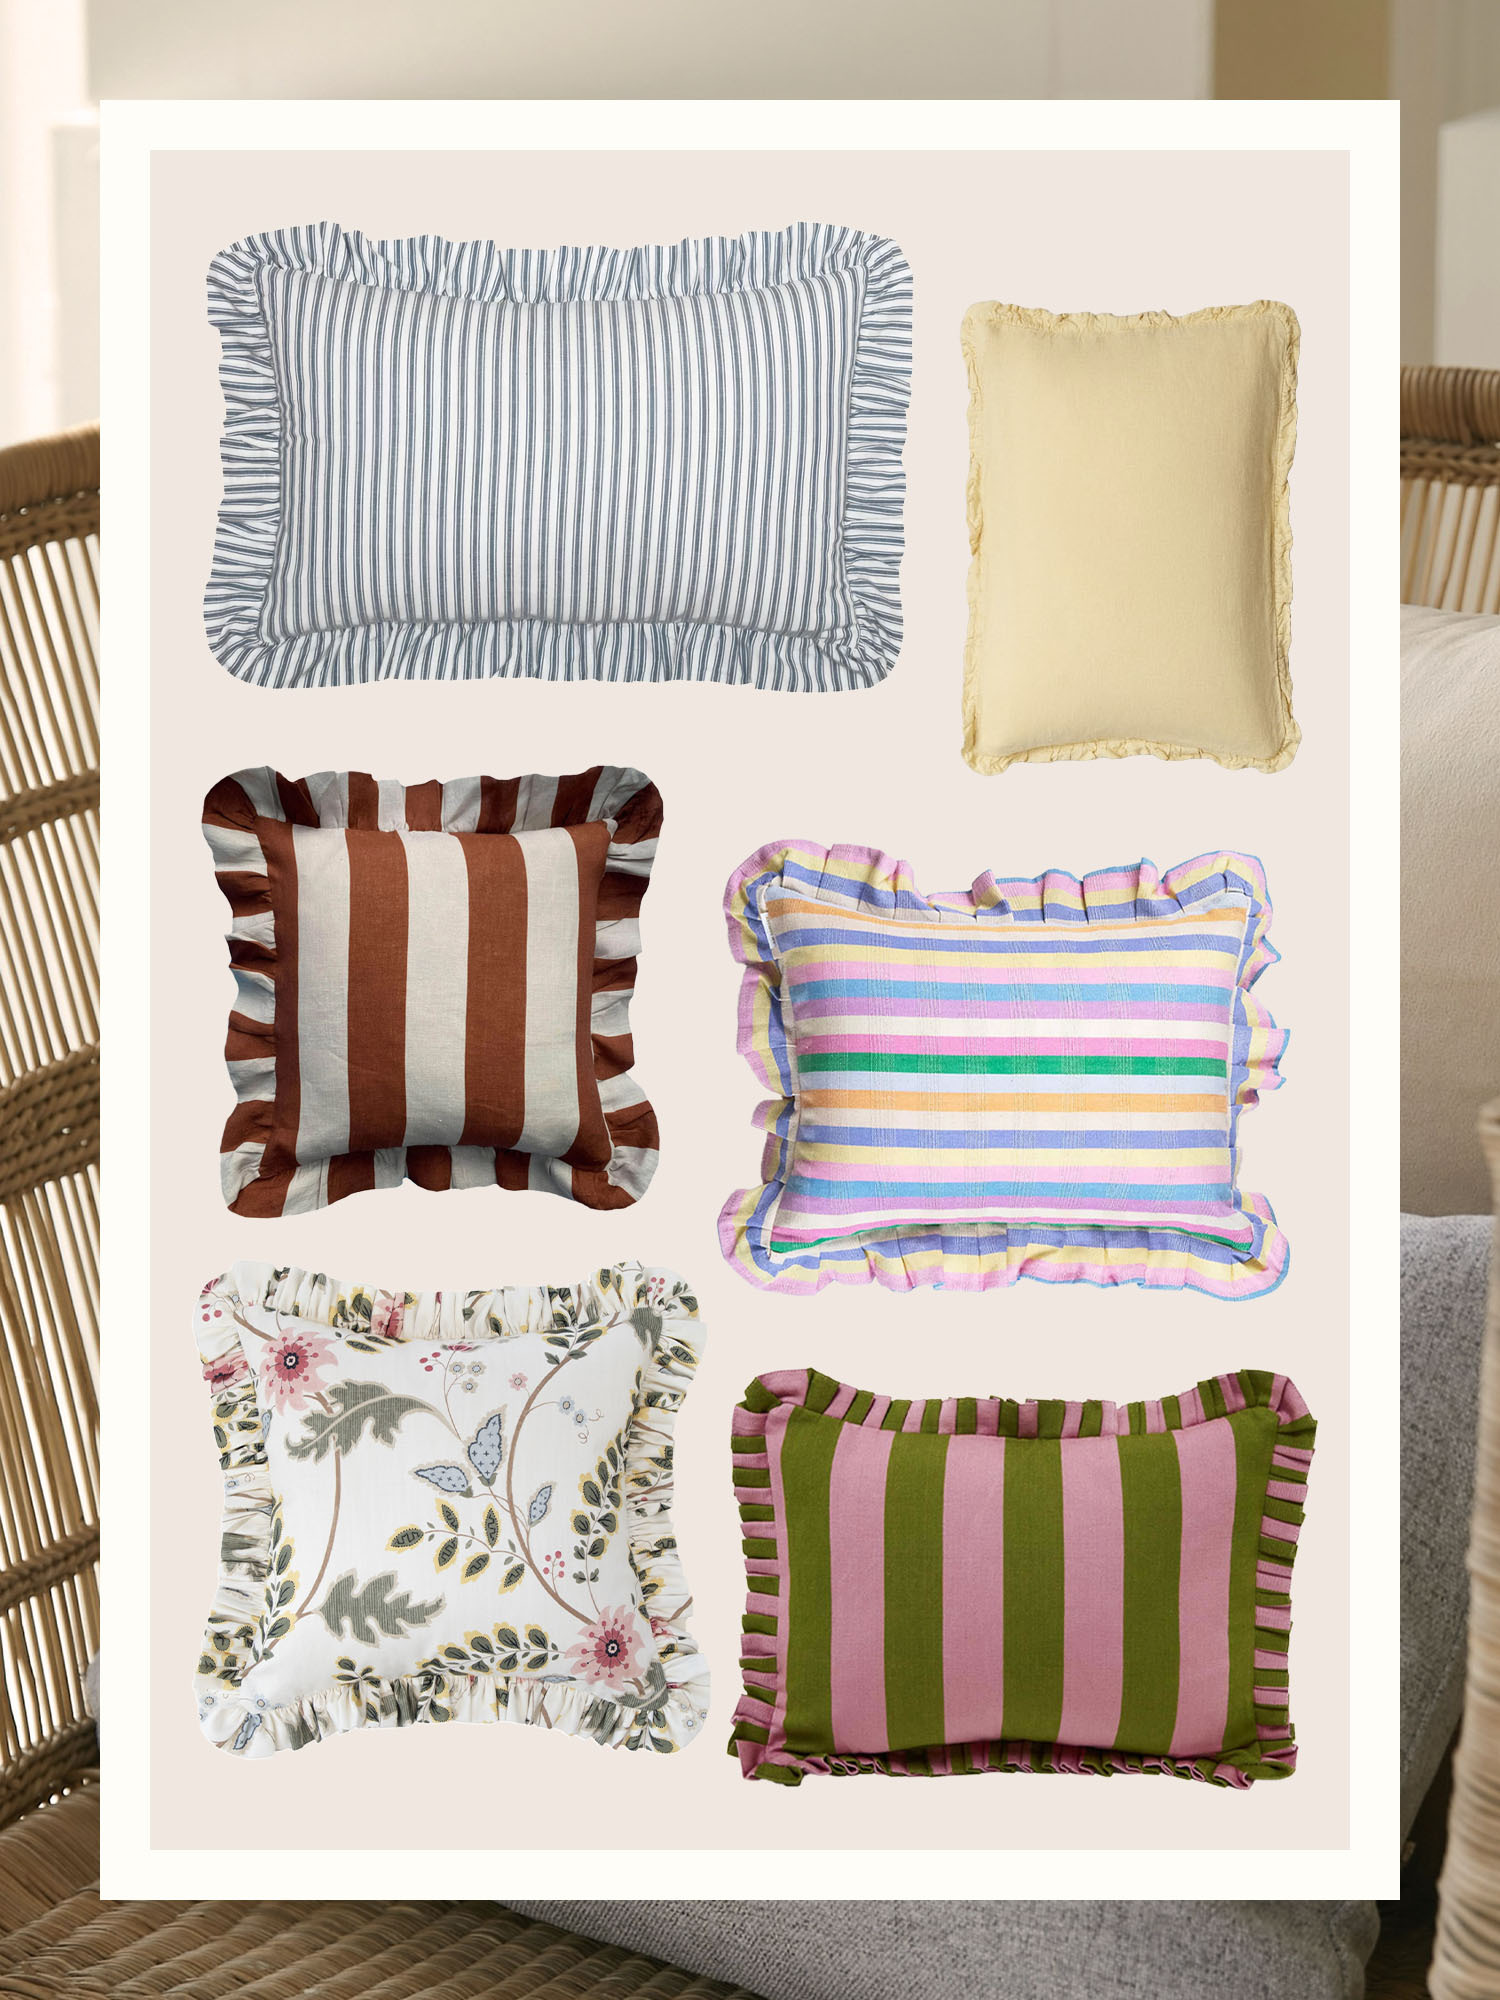 Domino-Ruffled-Pillows-2-FEATURE